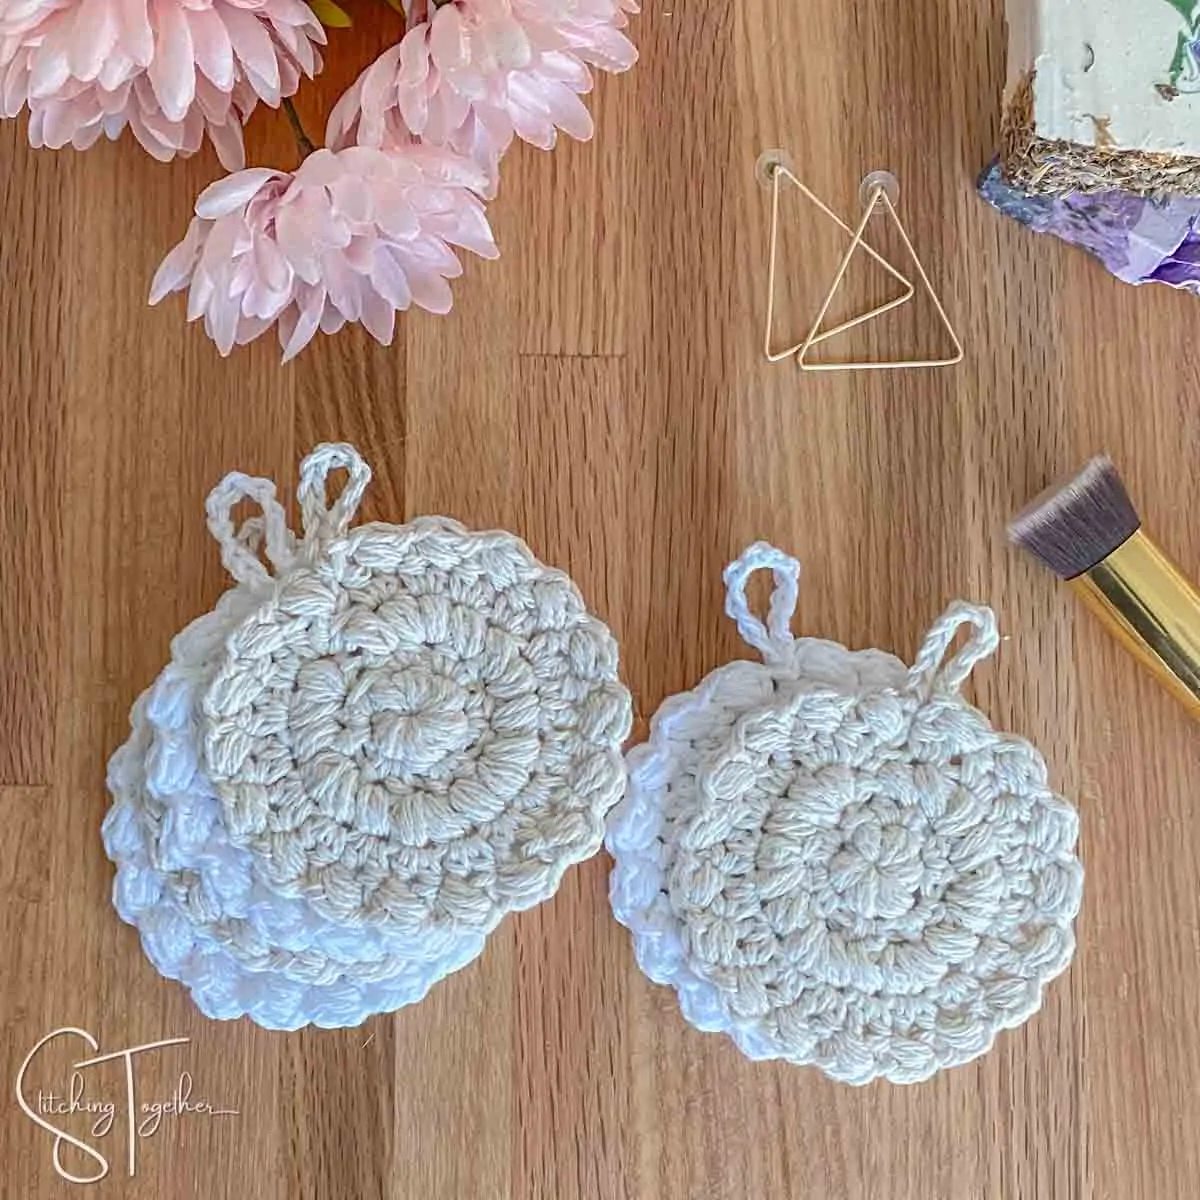 Lovely Makeup Remover Pads Pattern